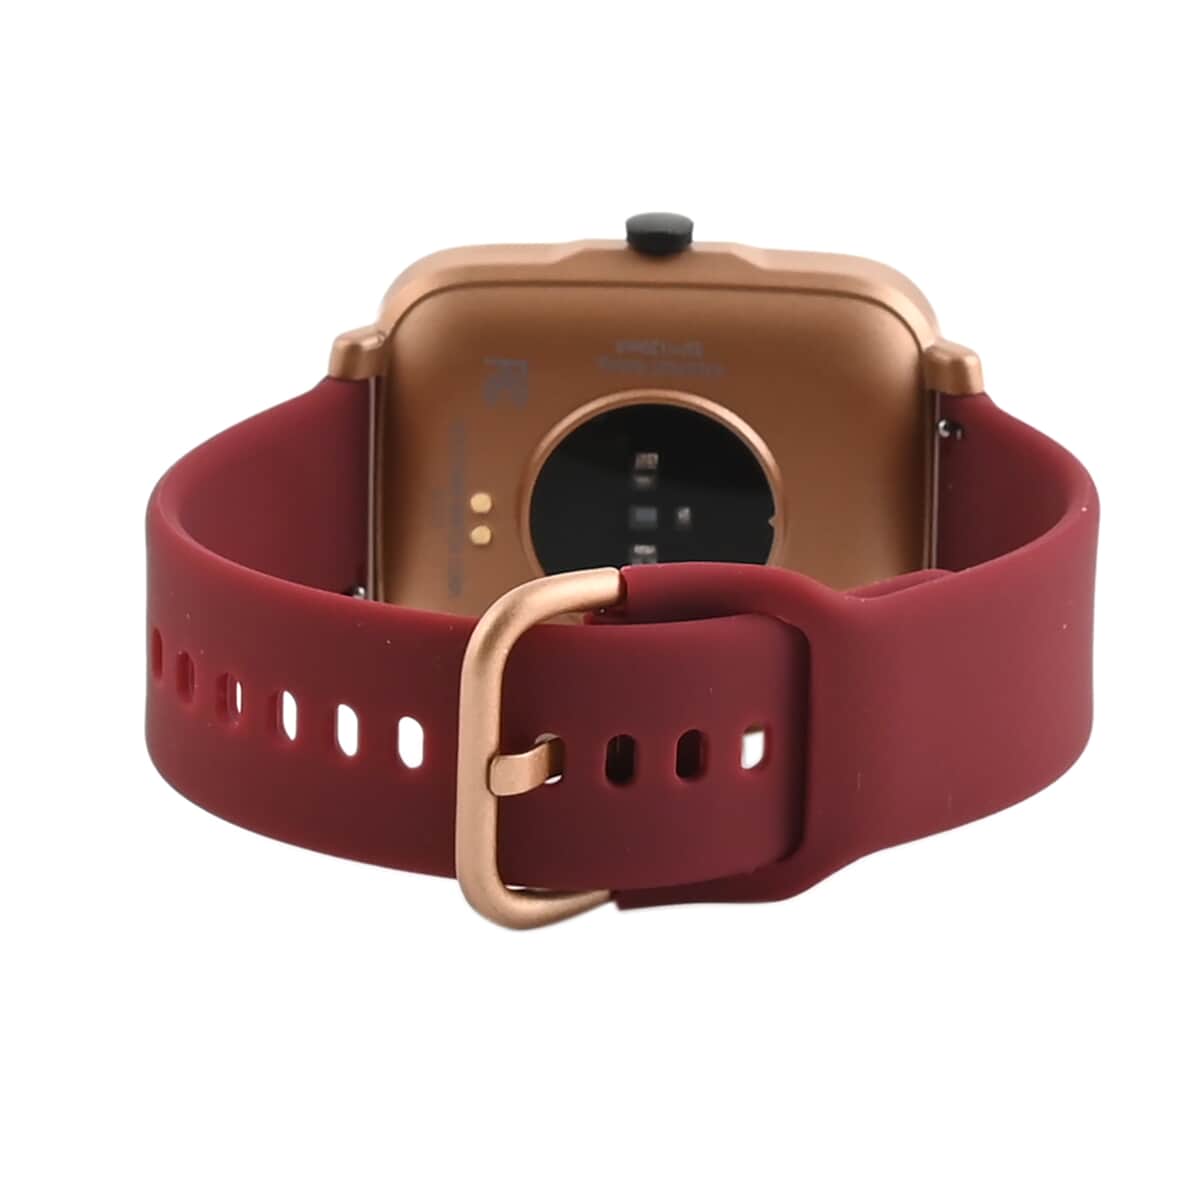 iTime Full Touch Screen Smart Watch with Burgundy Silicone Strap (40 mm Dial) image number 5